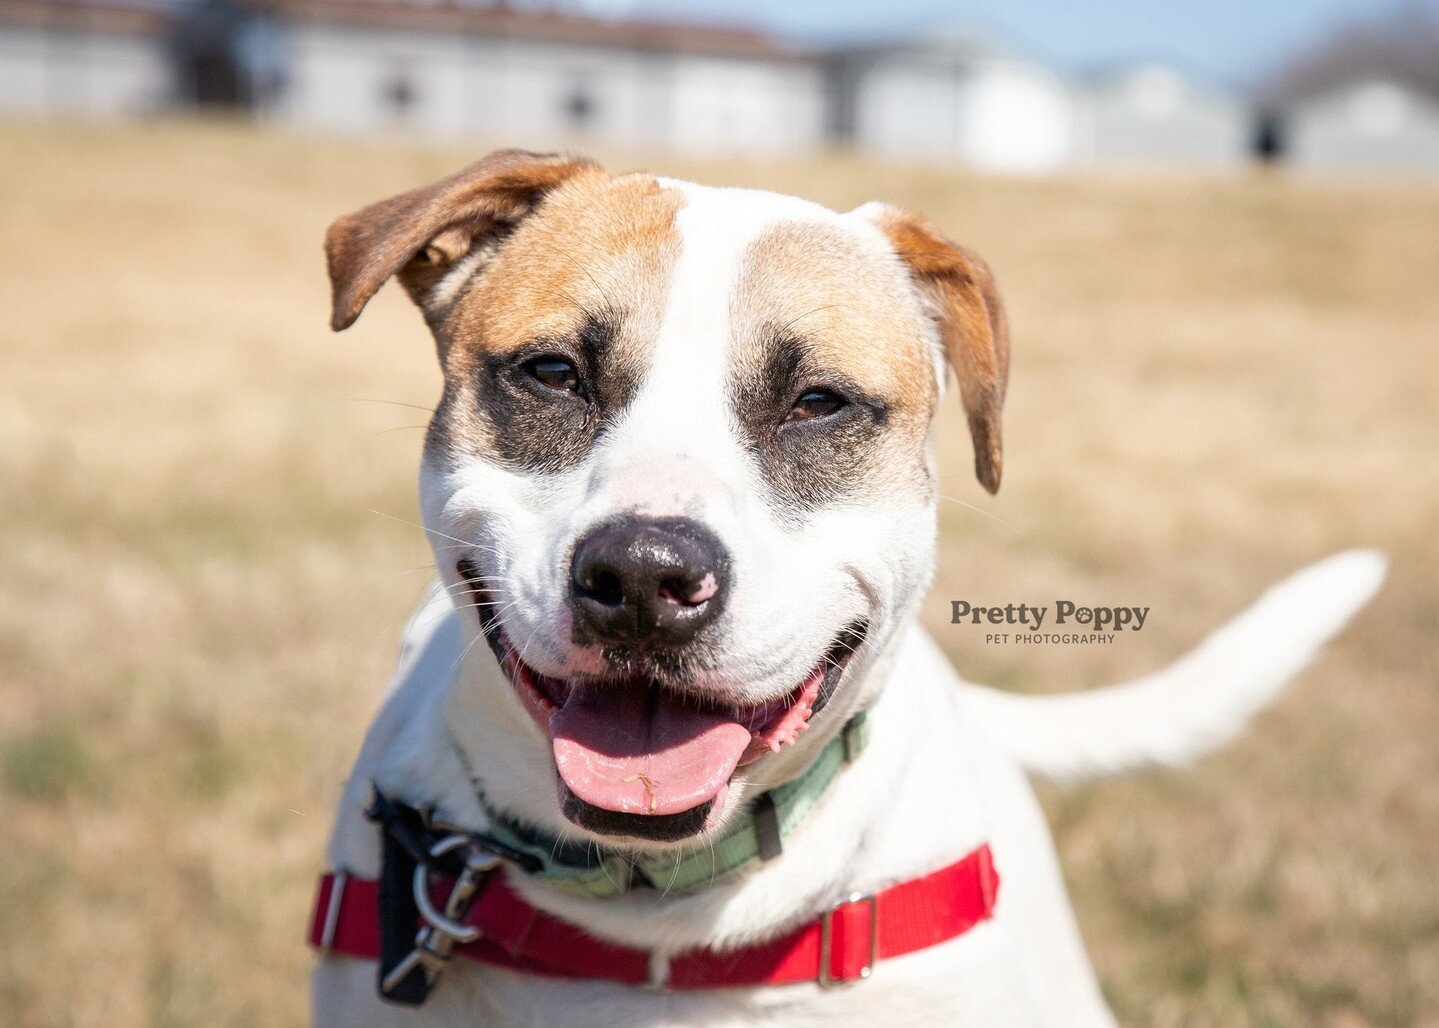 Ghost is a sweet one year old pit bull terrier who loves to play. He is a favorite amongst volunteers for his fun and affectionate personality. He just got adopted after 6 months at the shelter 🎉